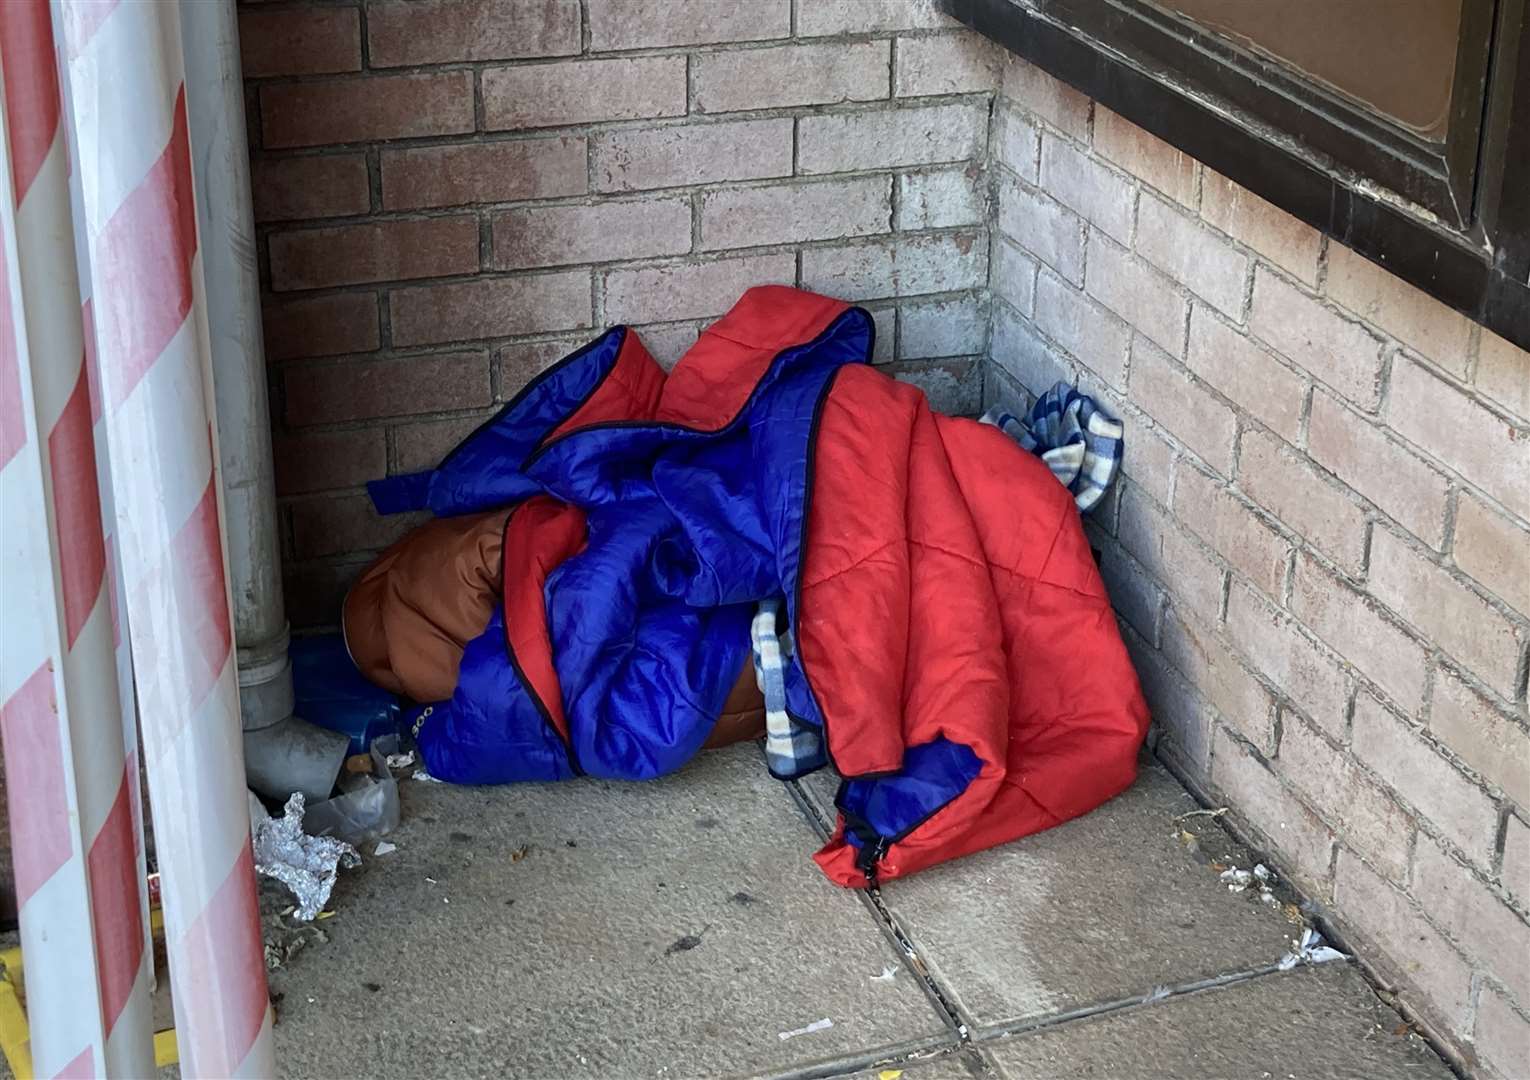 Colin says homelessness has become "more dangerous". Stock image